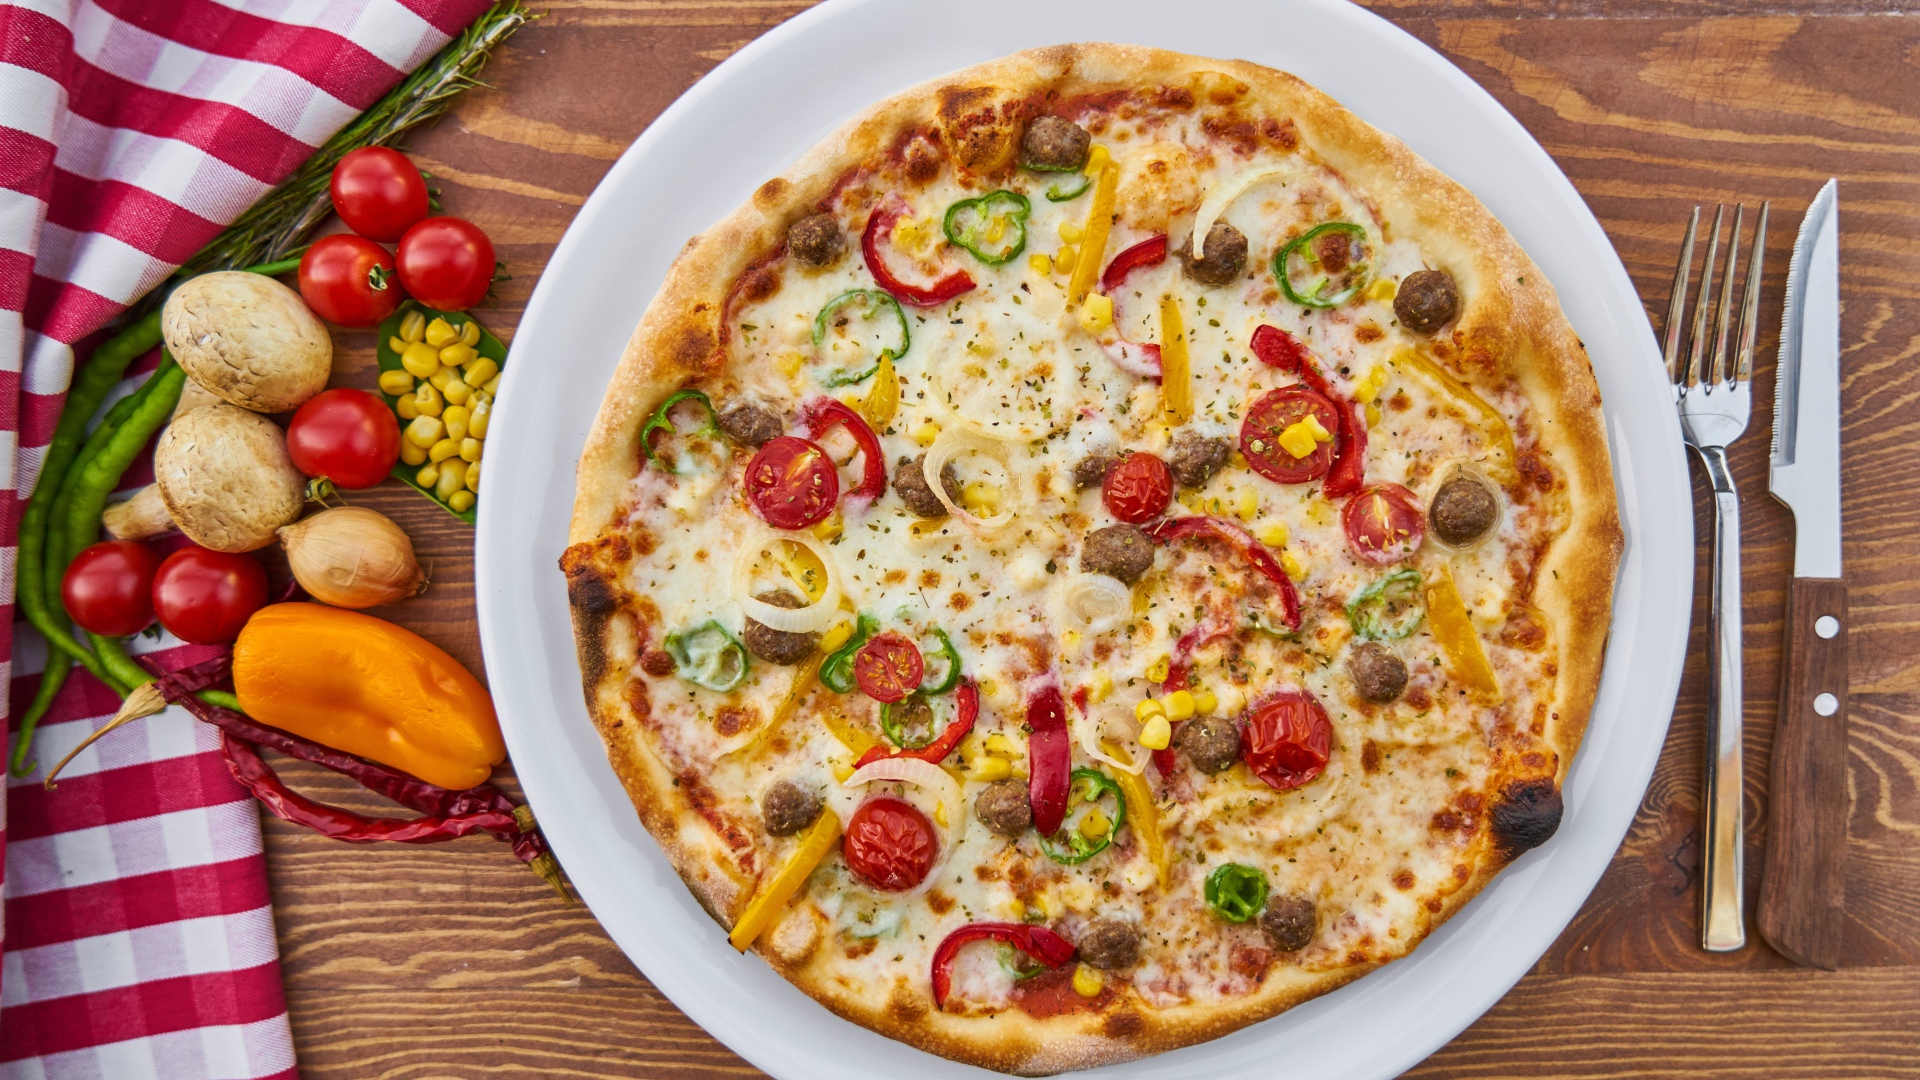 Appetizing tasty pizza on a table with vegetables